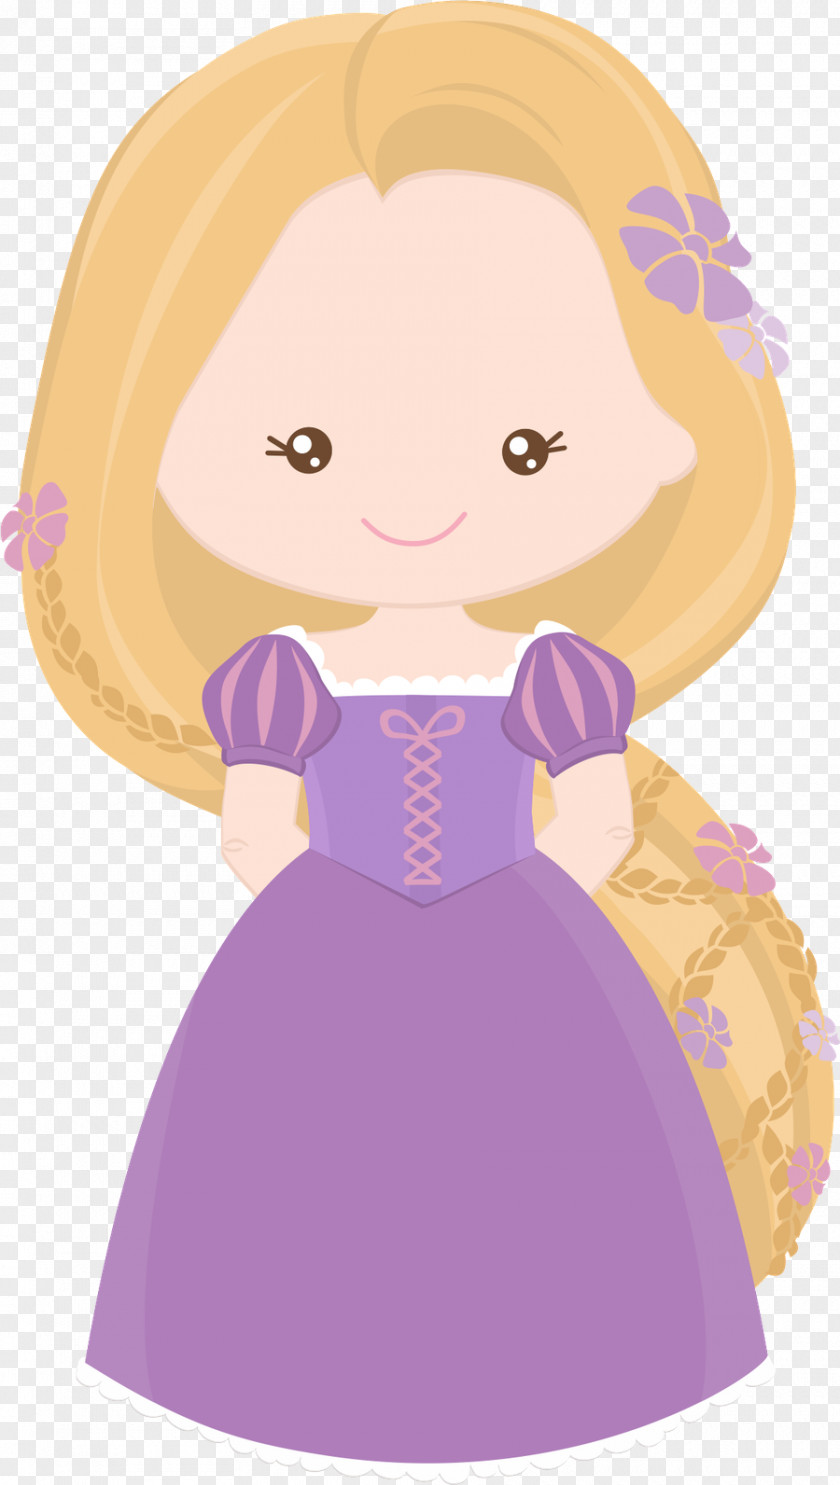 Snow White Rapunzel Princesas Tangled: The Video Game Clip Art PNG